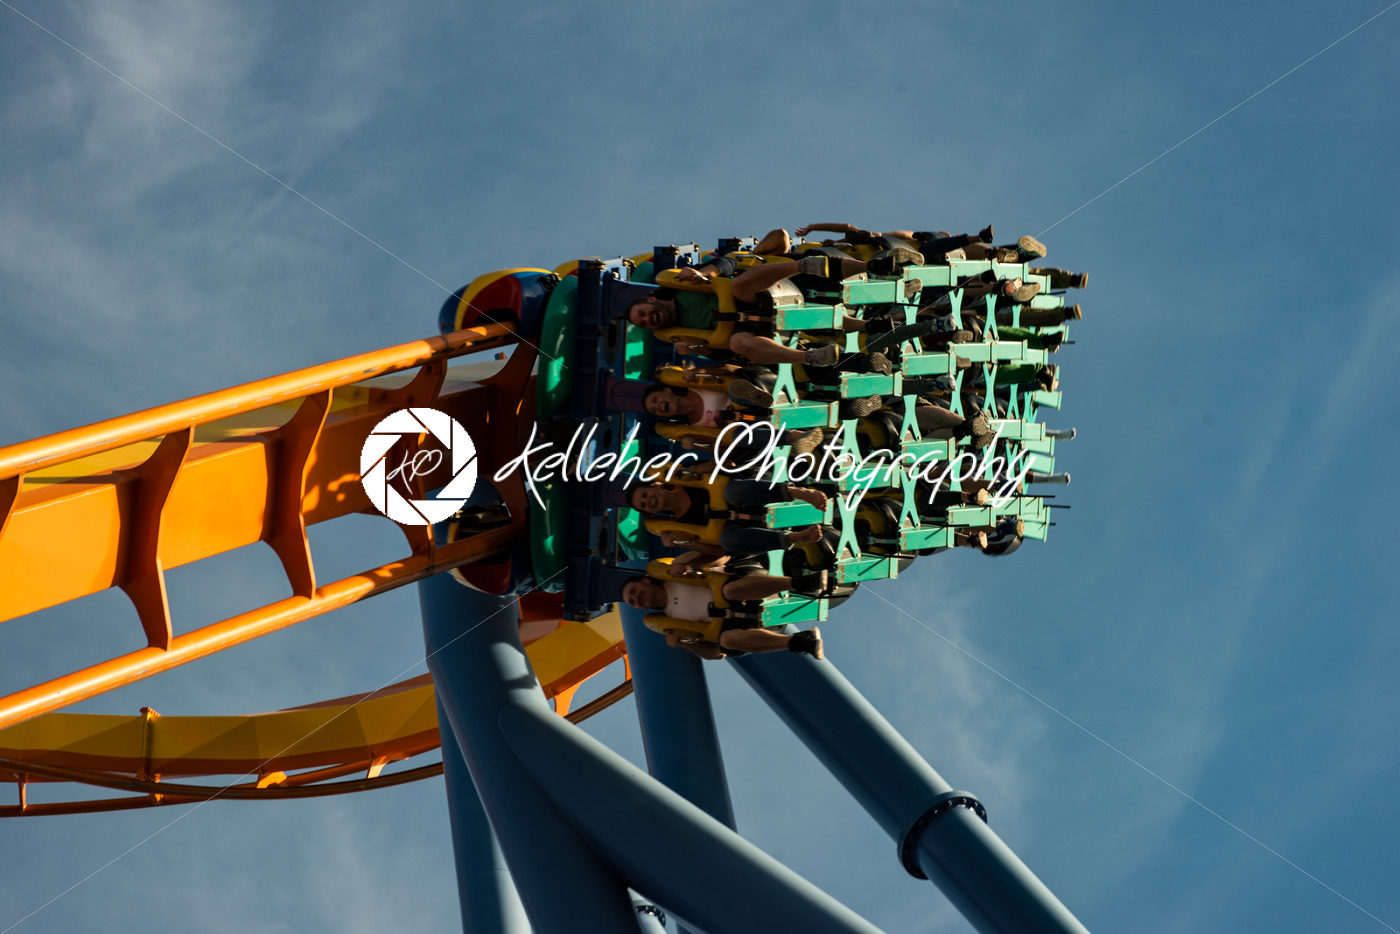 ALLENTOWN, PA – OCTOBER 22: Roller Coasters at Dorney Park in Allentown, Pennsylvania - Kelleher Photography Store